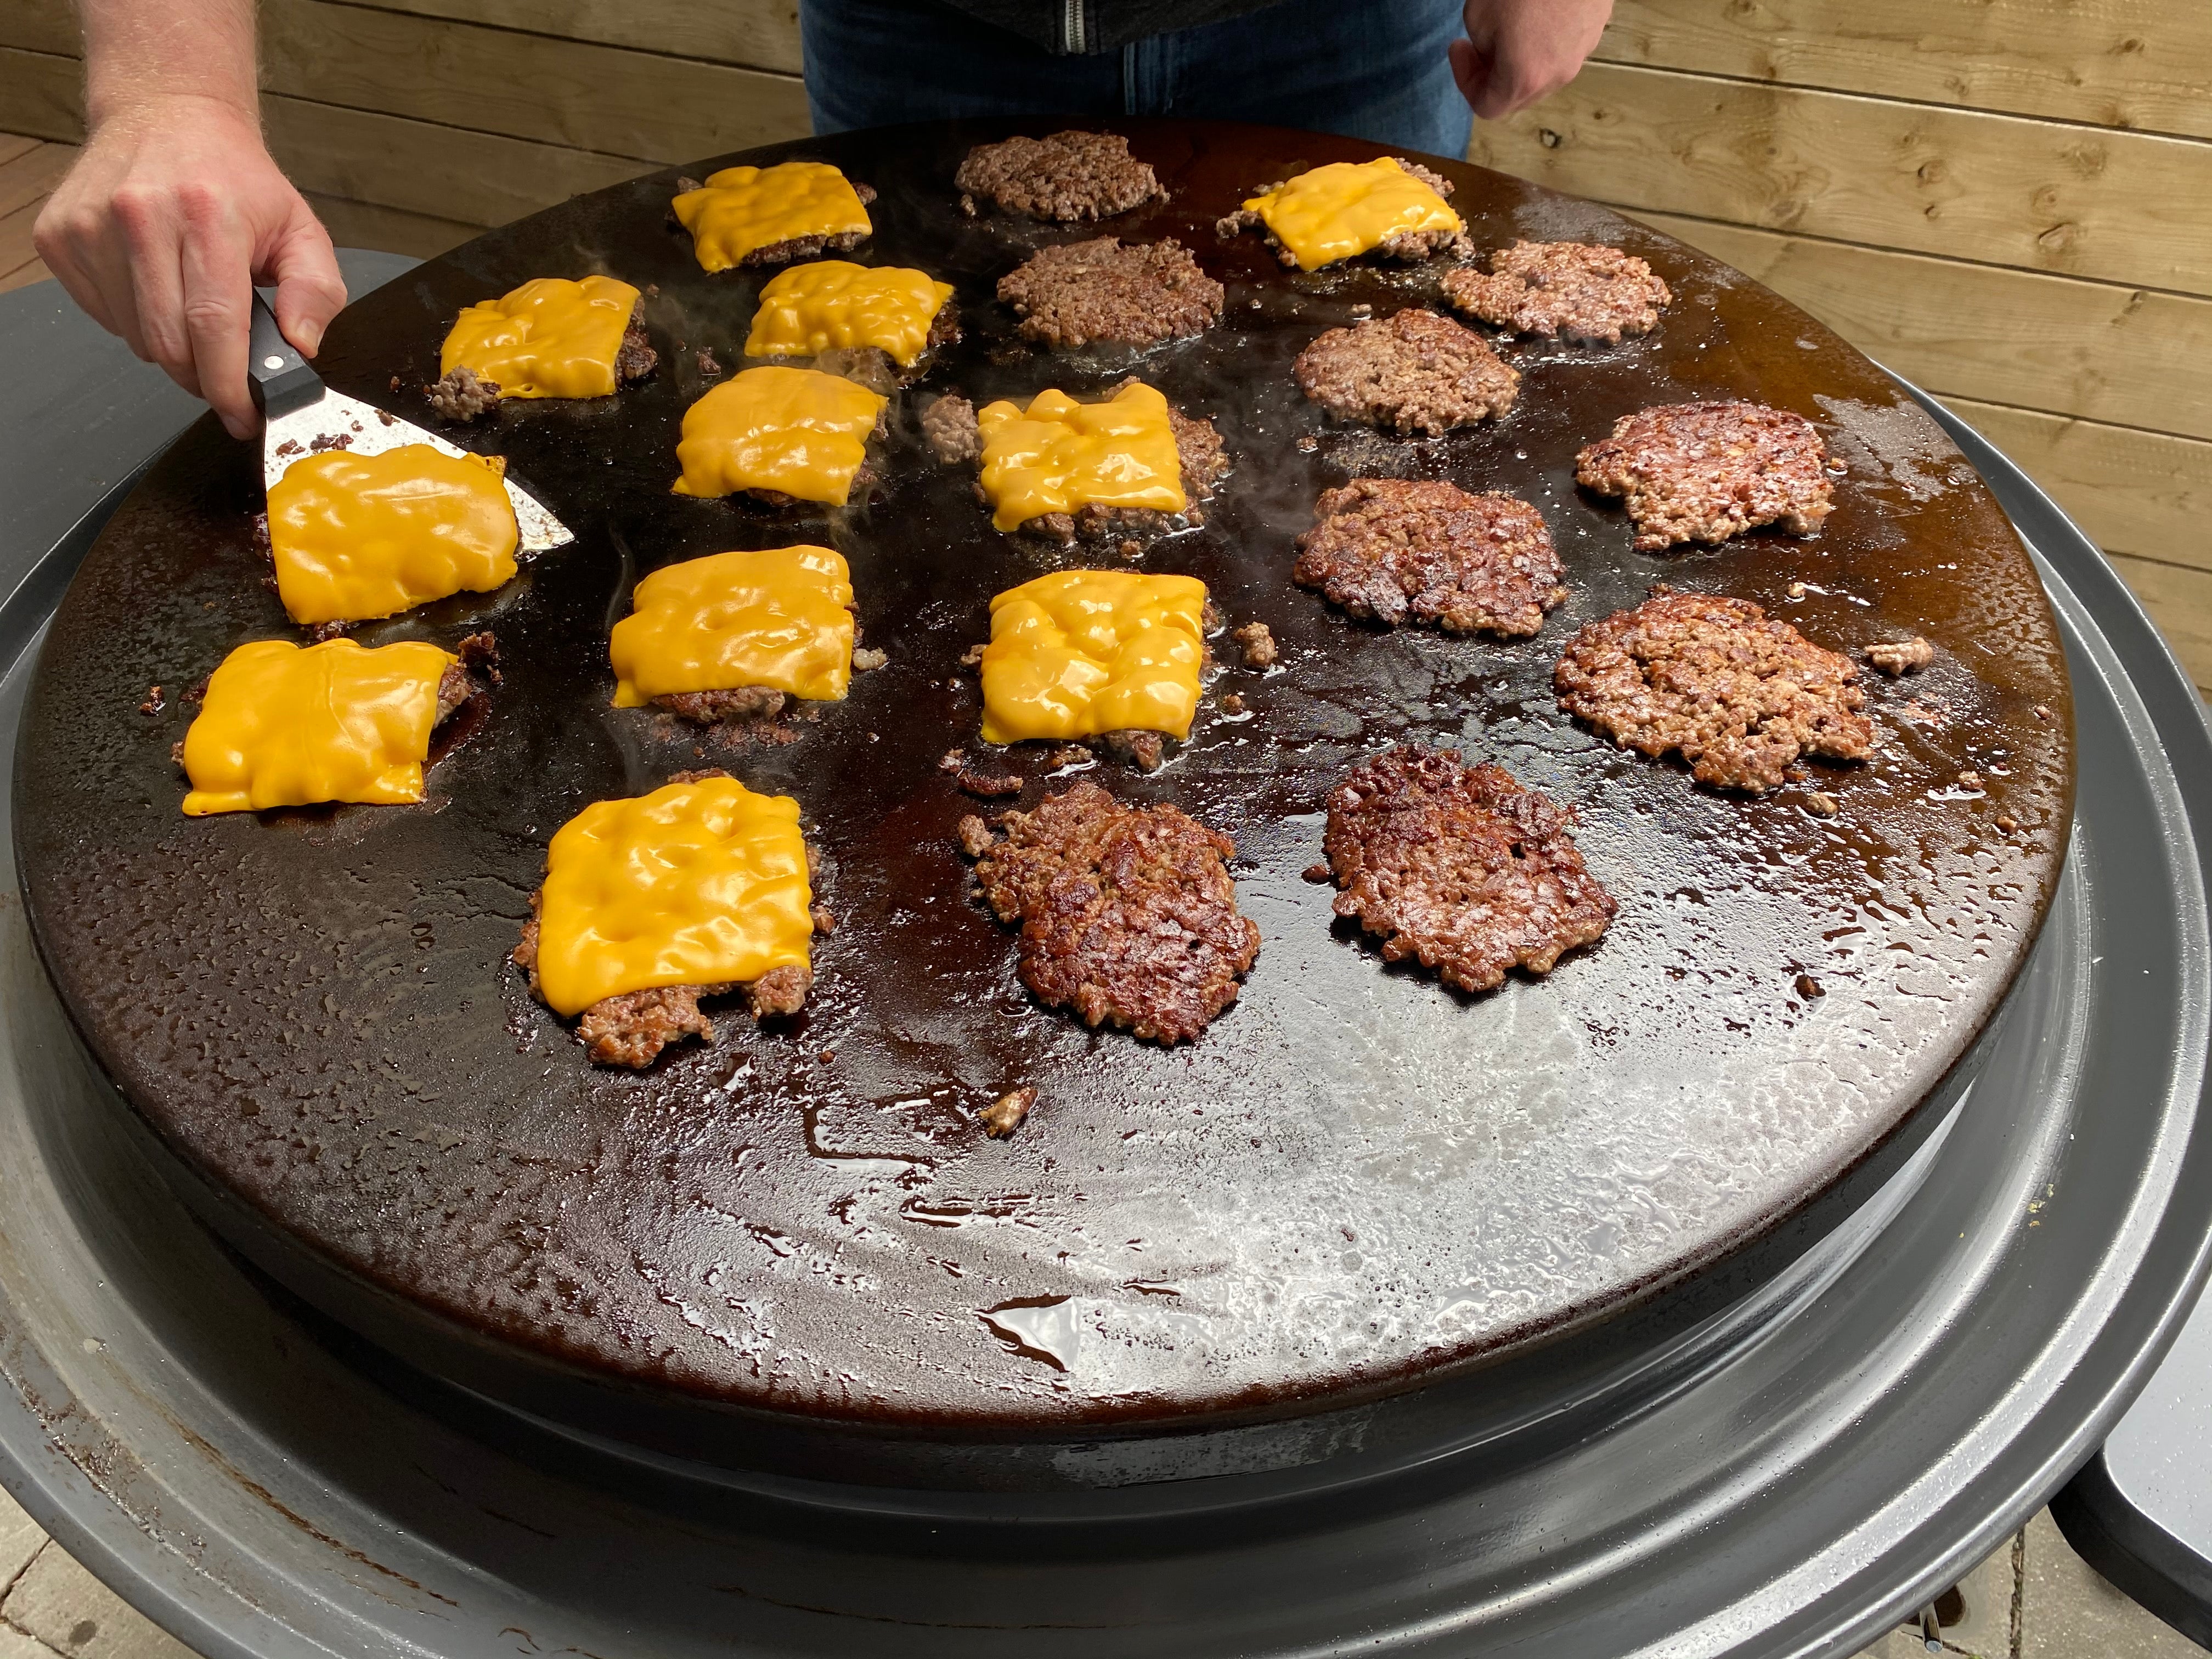 Smash burgers on my carbon steel griddle from @Made In if youve